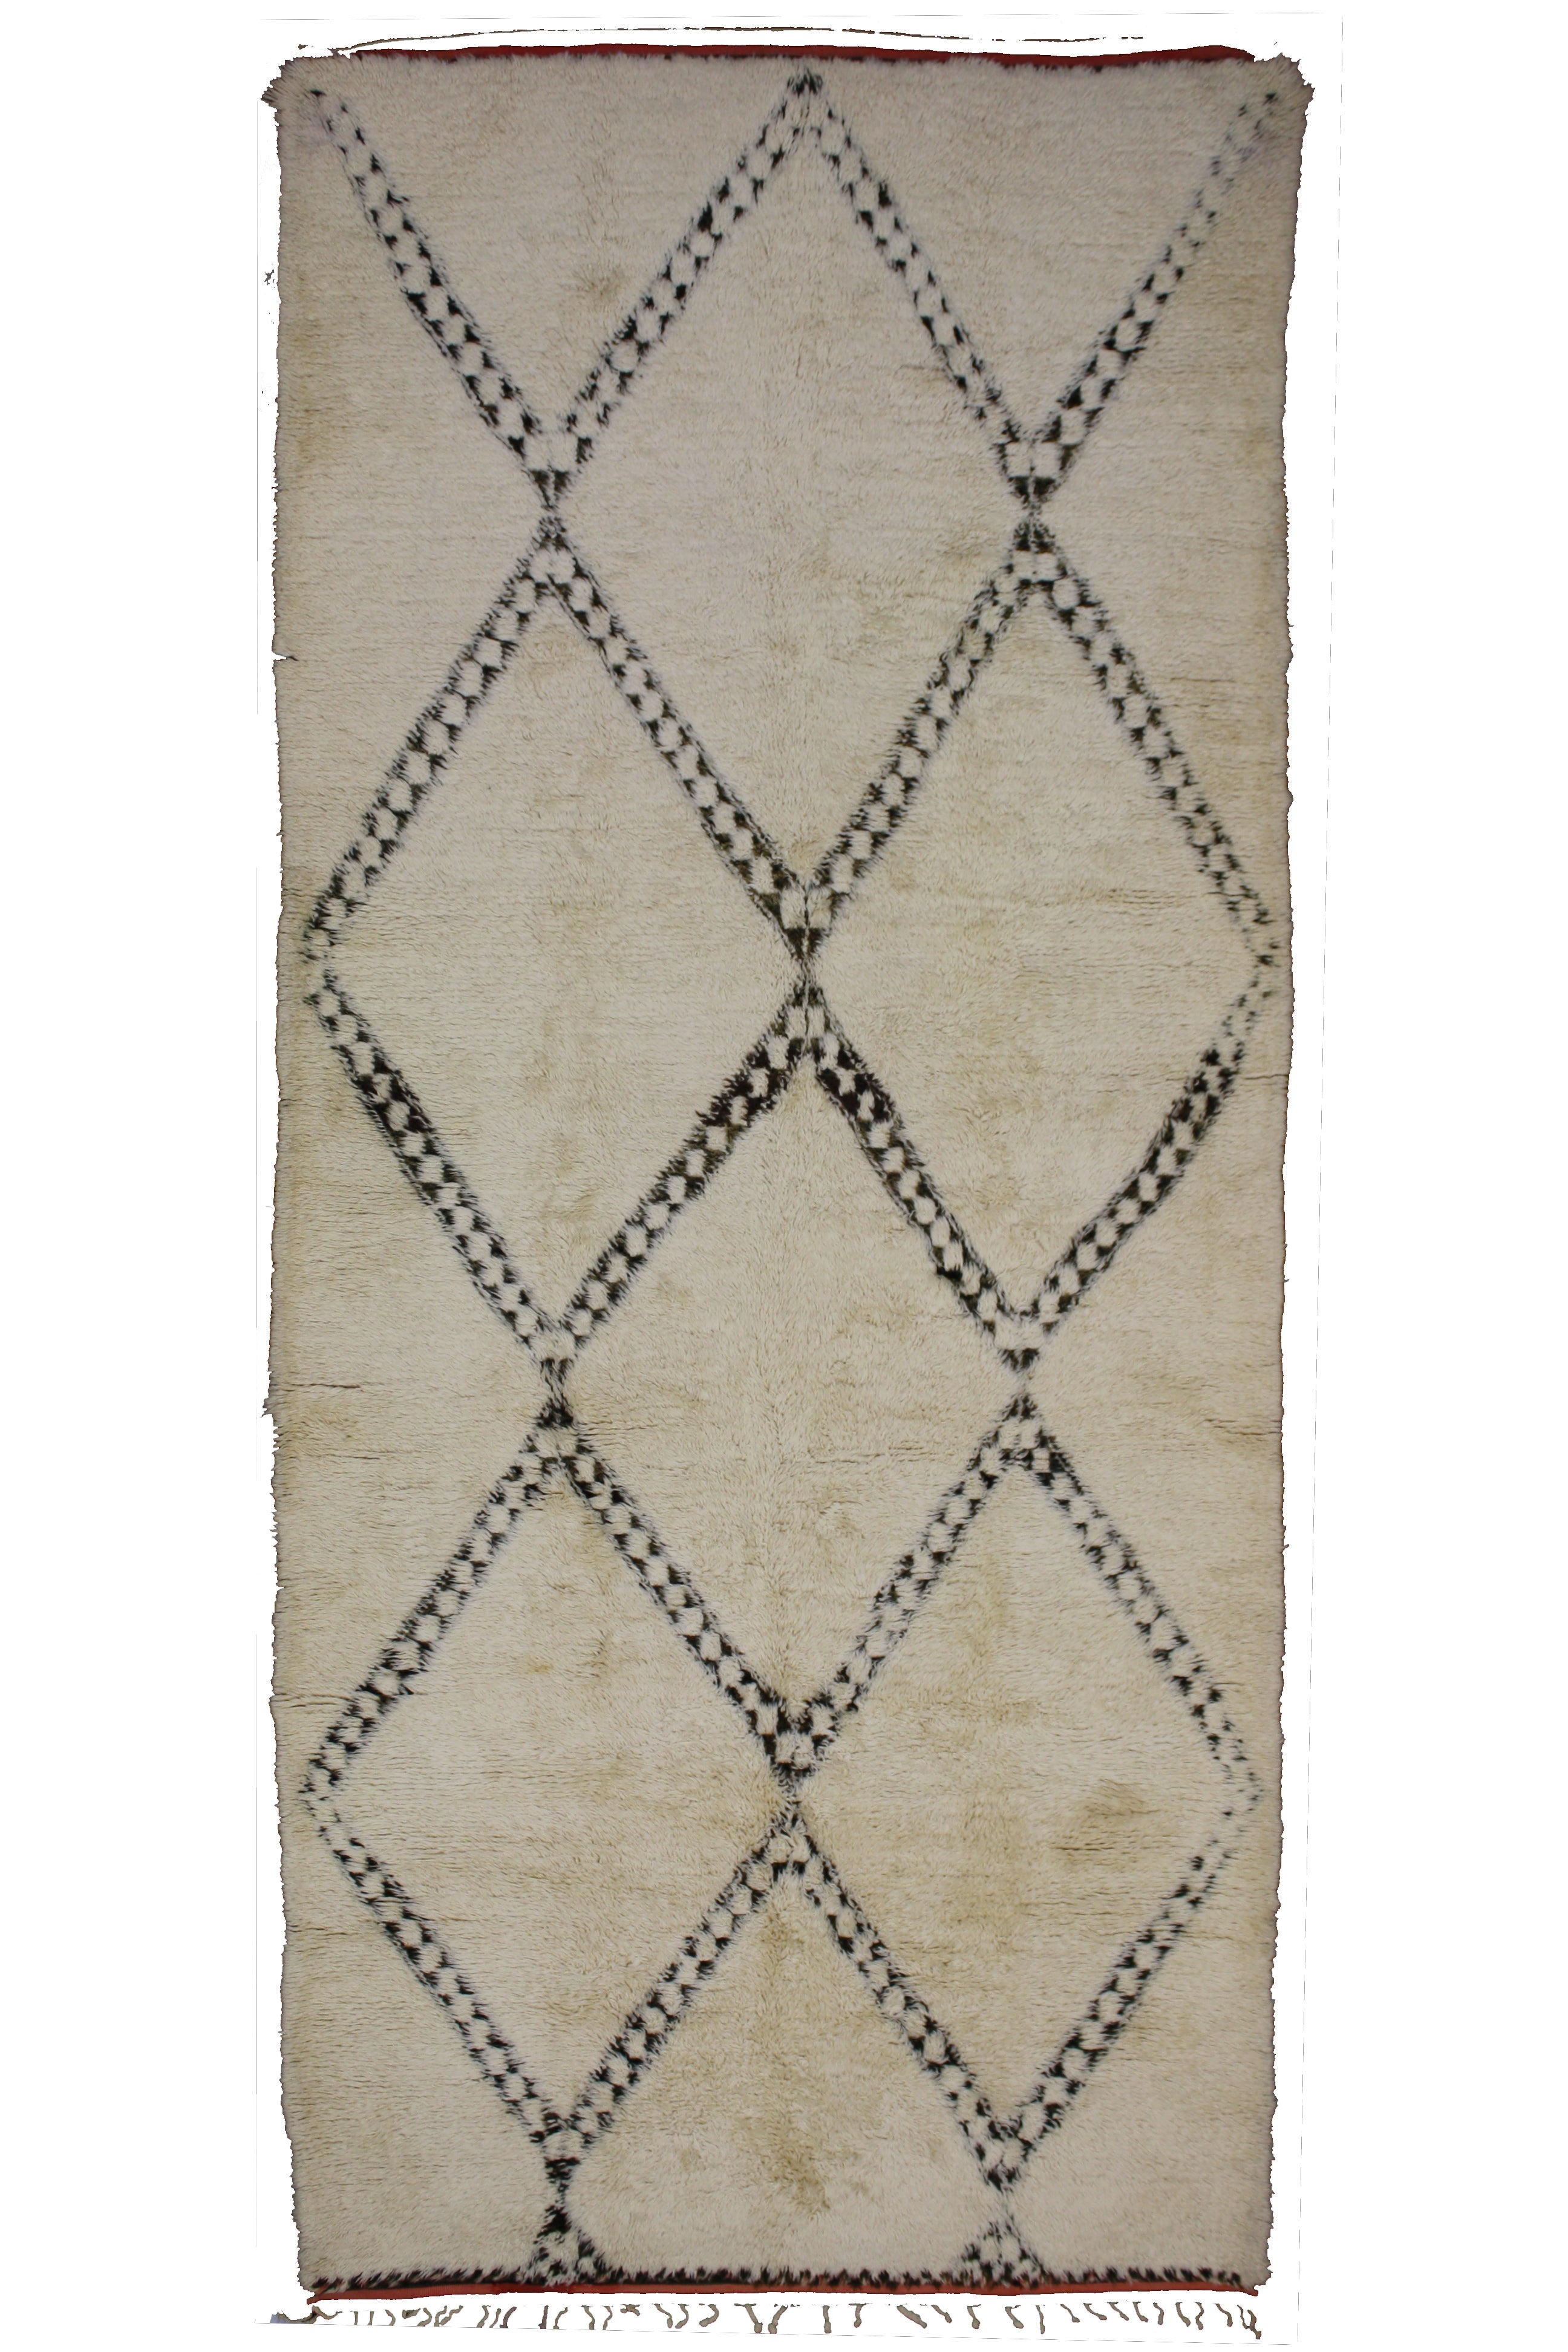 Beni Ouarain Moroccan Rug with Minimalist Design and Mid-Century Modern Style